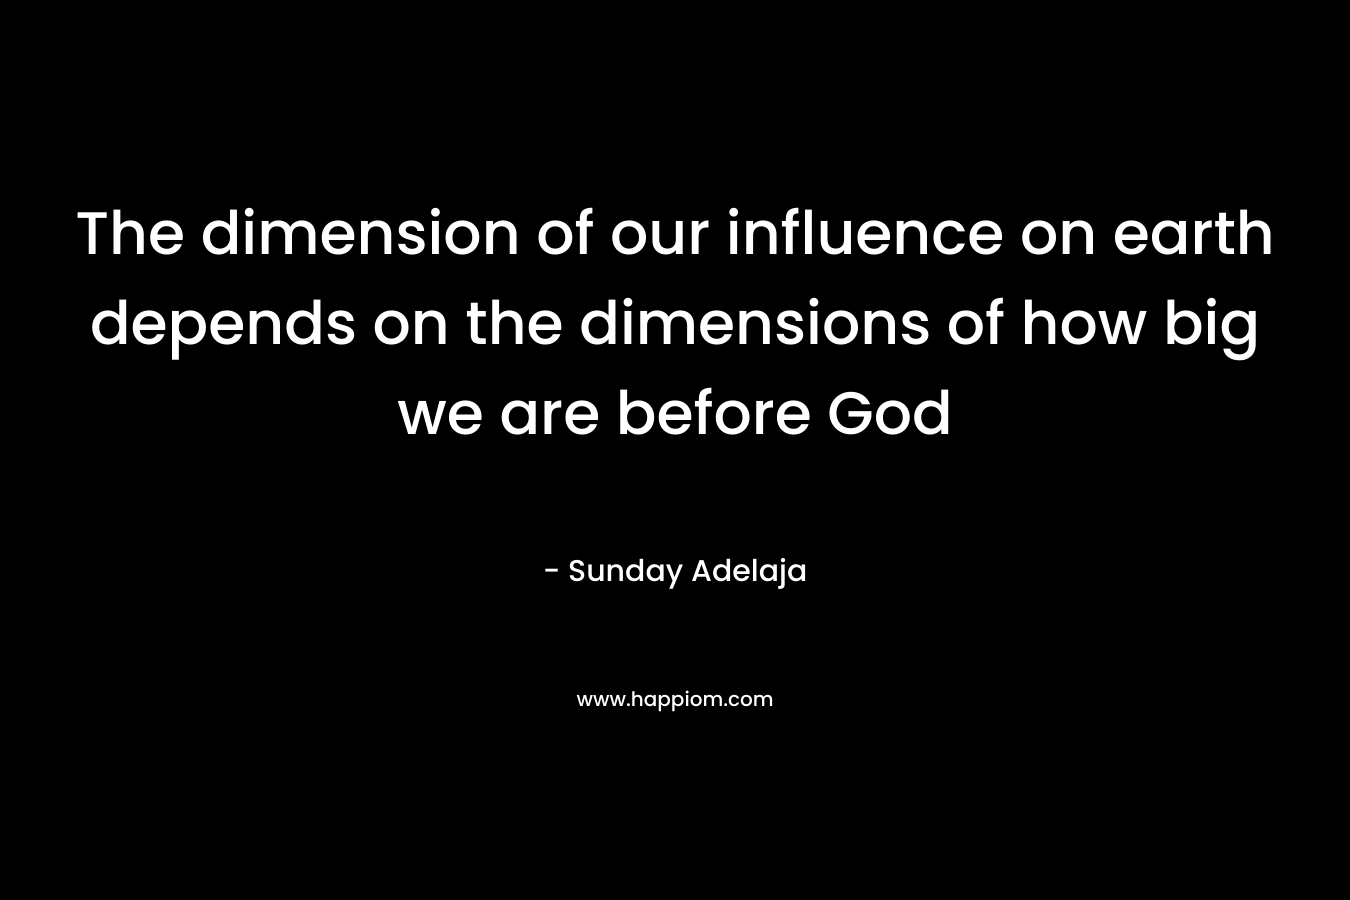 The dimension of our influence on earth depends on the dimensions of how big we are before God